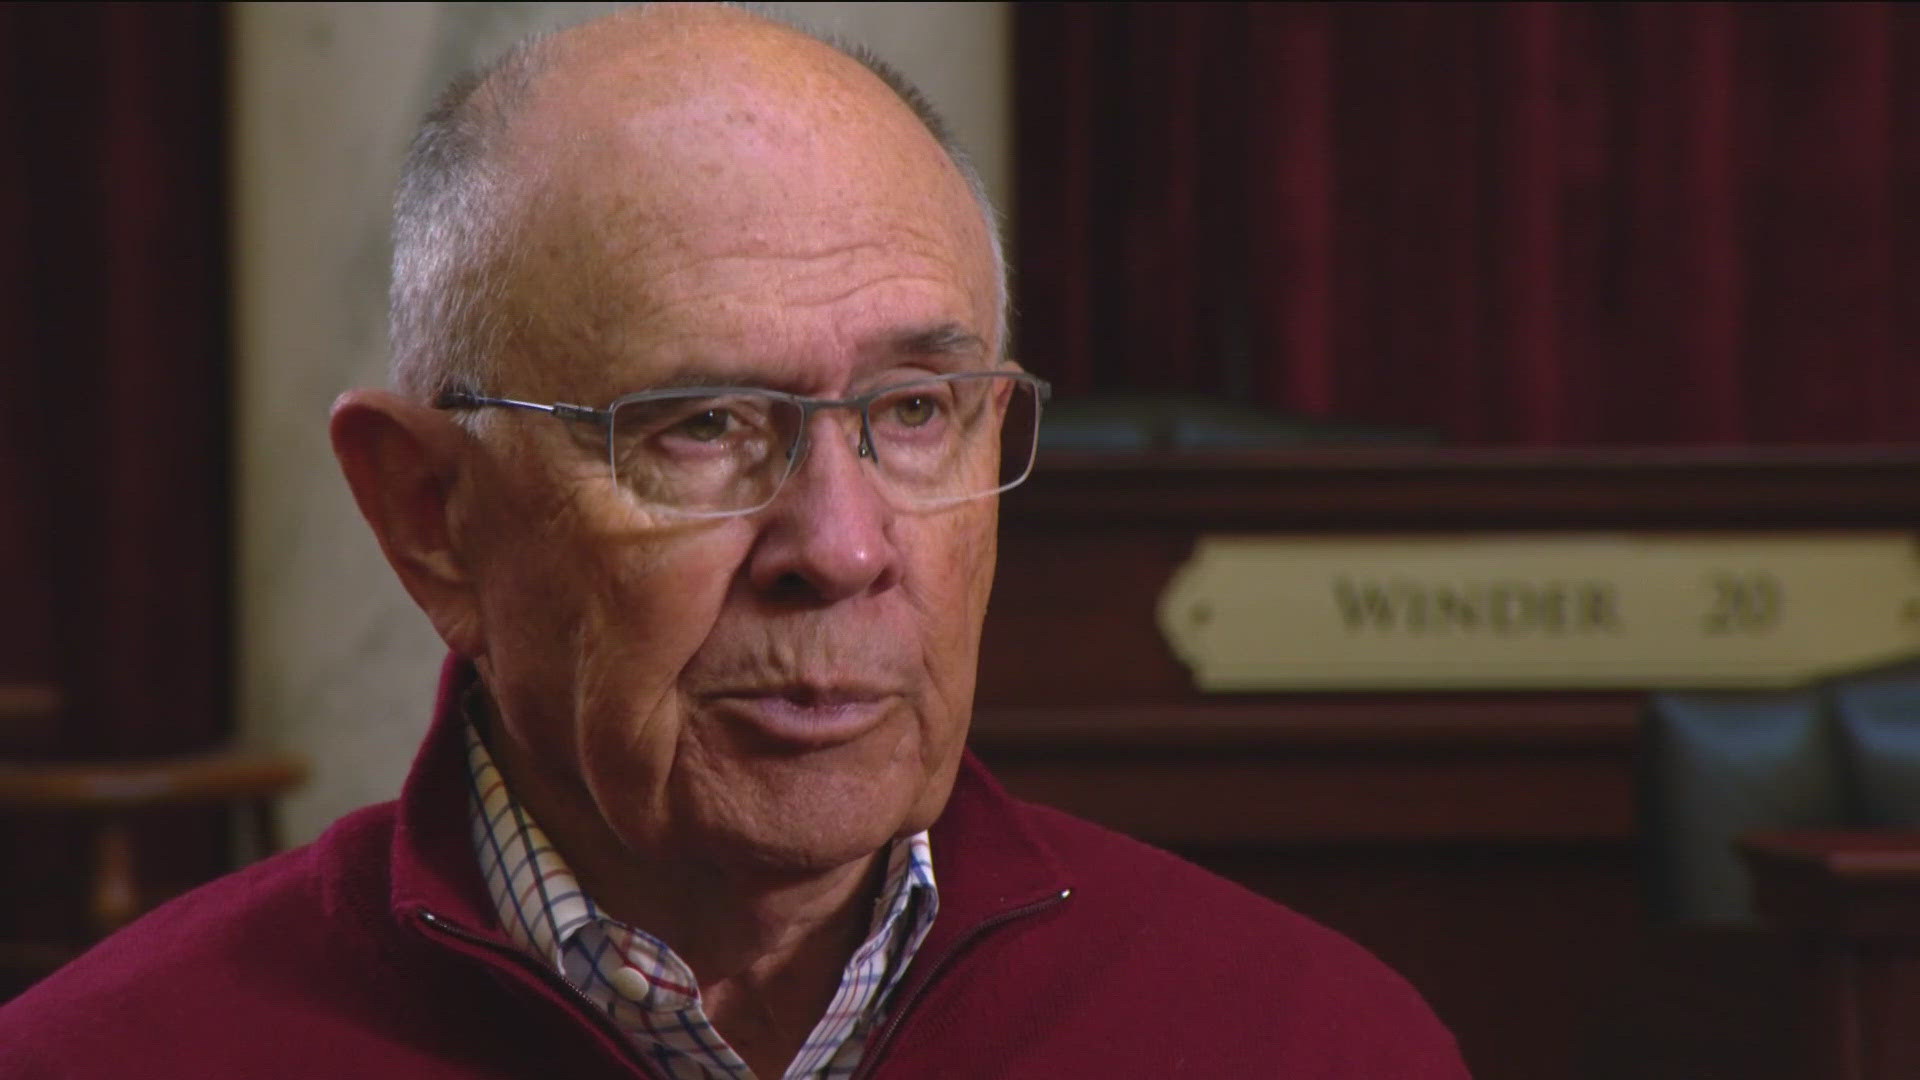 Longtime Idaho Senate leader Chuck Winder was ousted in the Republican primary election for District 20. His challenger, Josh Keyser, earned 52% of the vote.